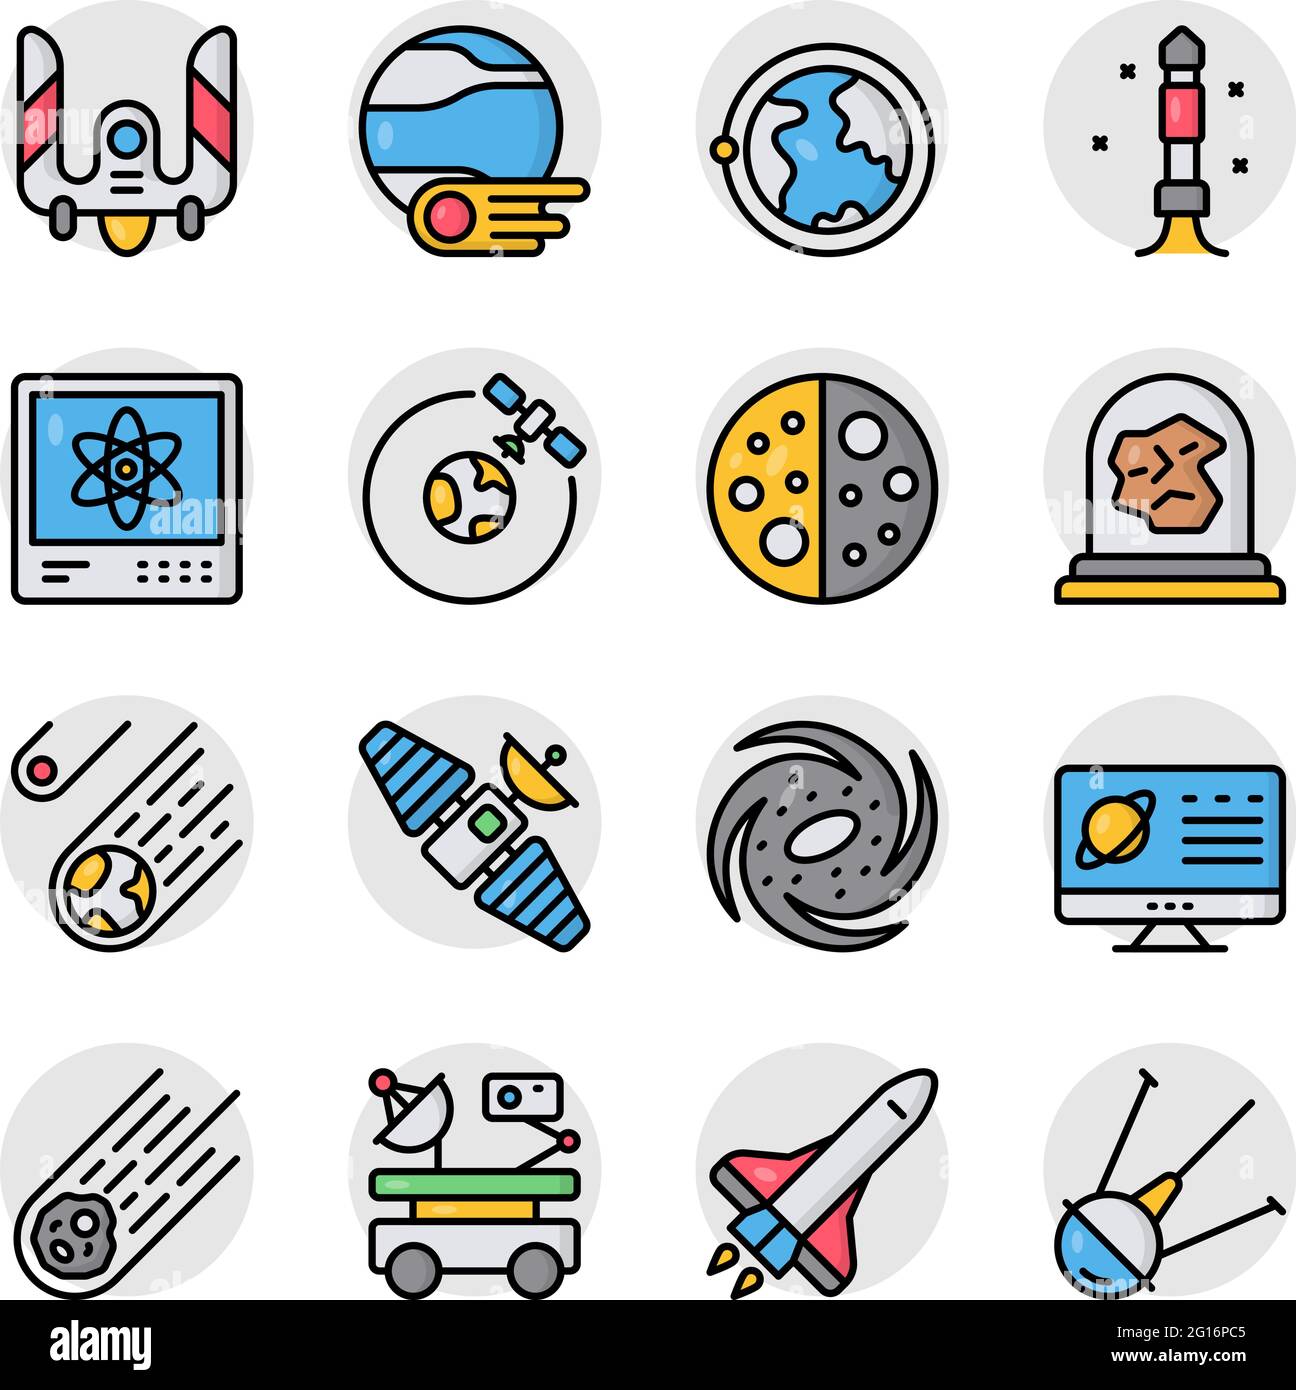 Pack of Atom Flat Icons Stock Vector